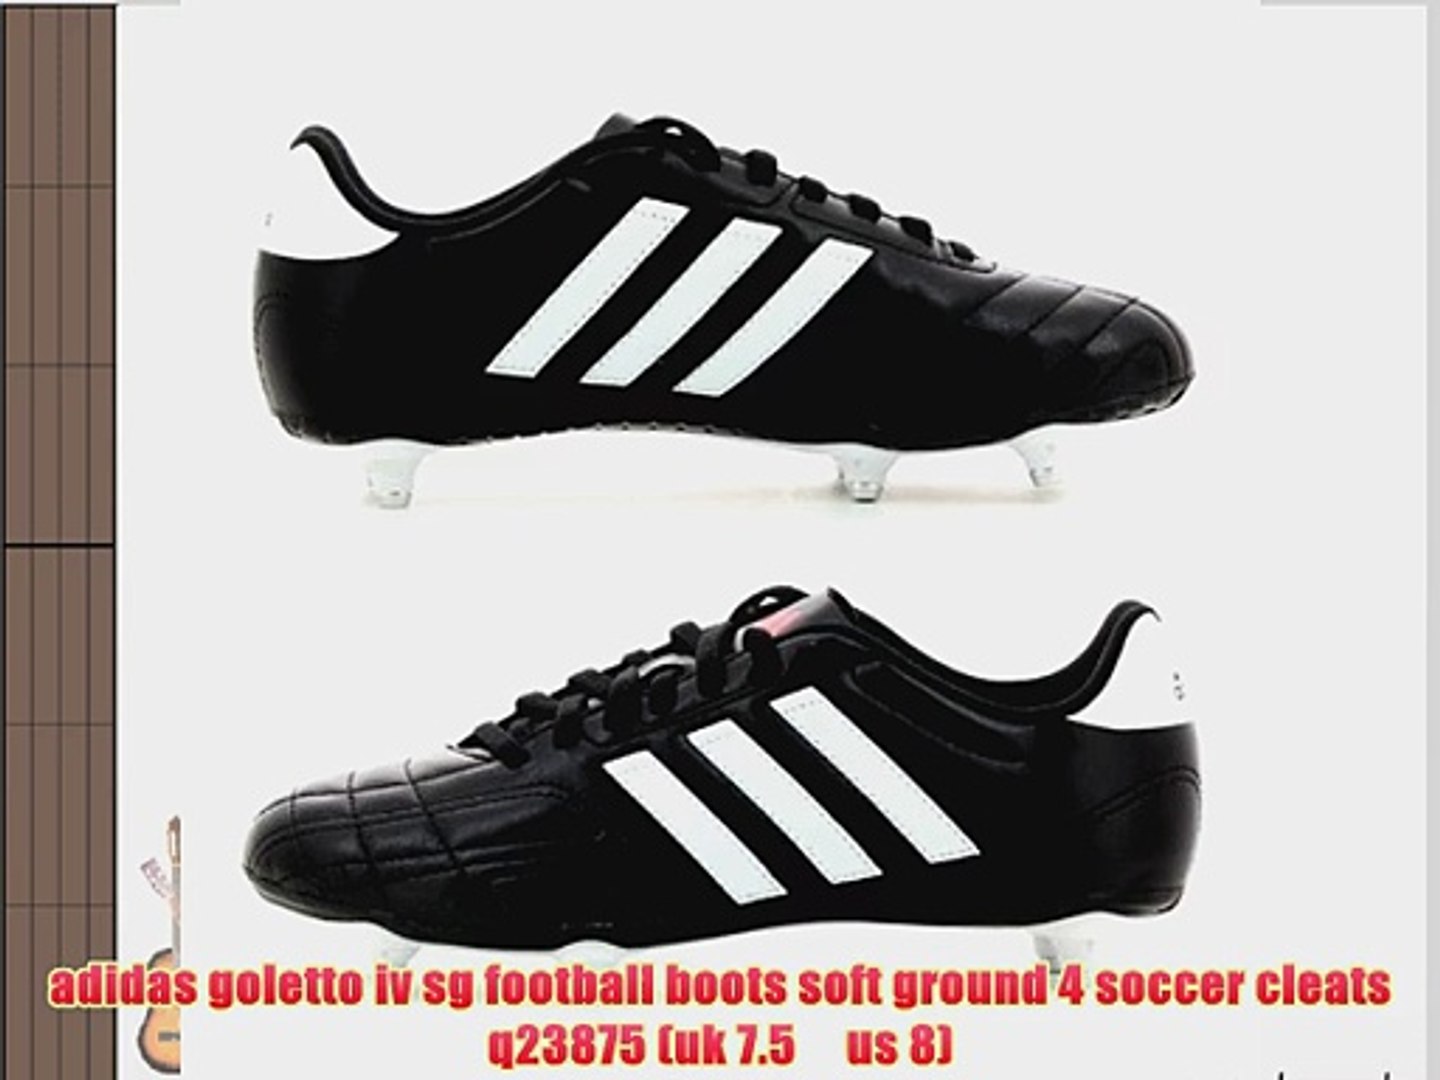 Adidas Goletto Iv Sg Football Boots Soft Ground 4 Soccer Cleats